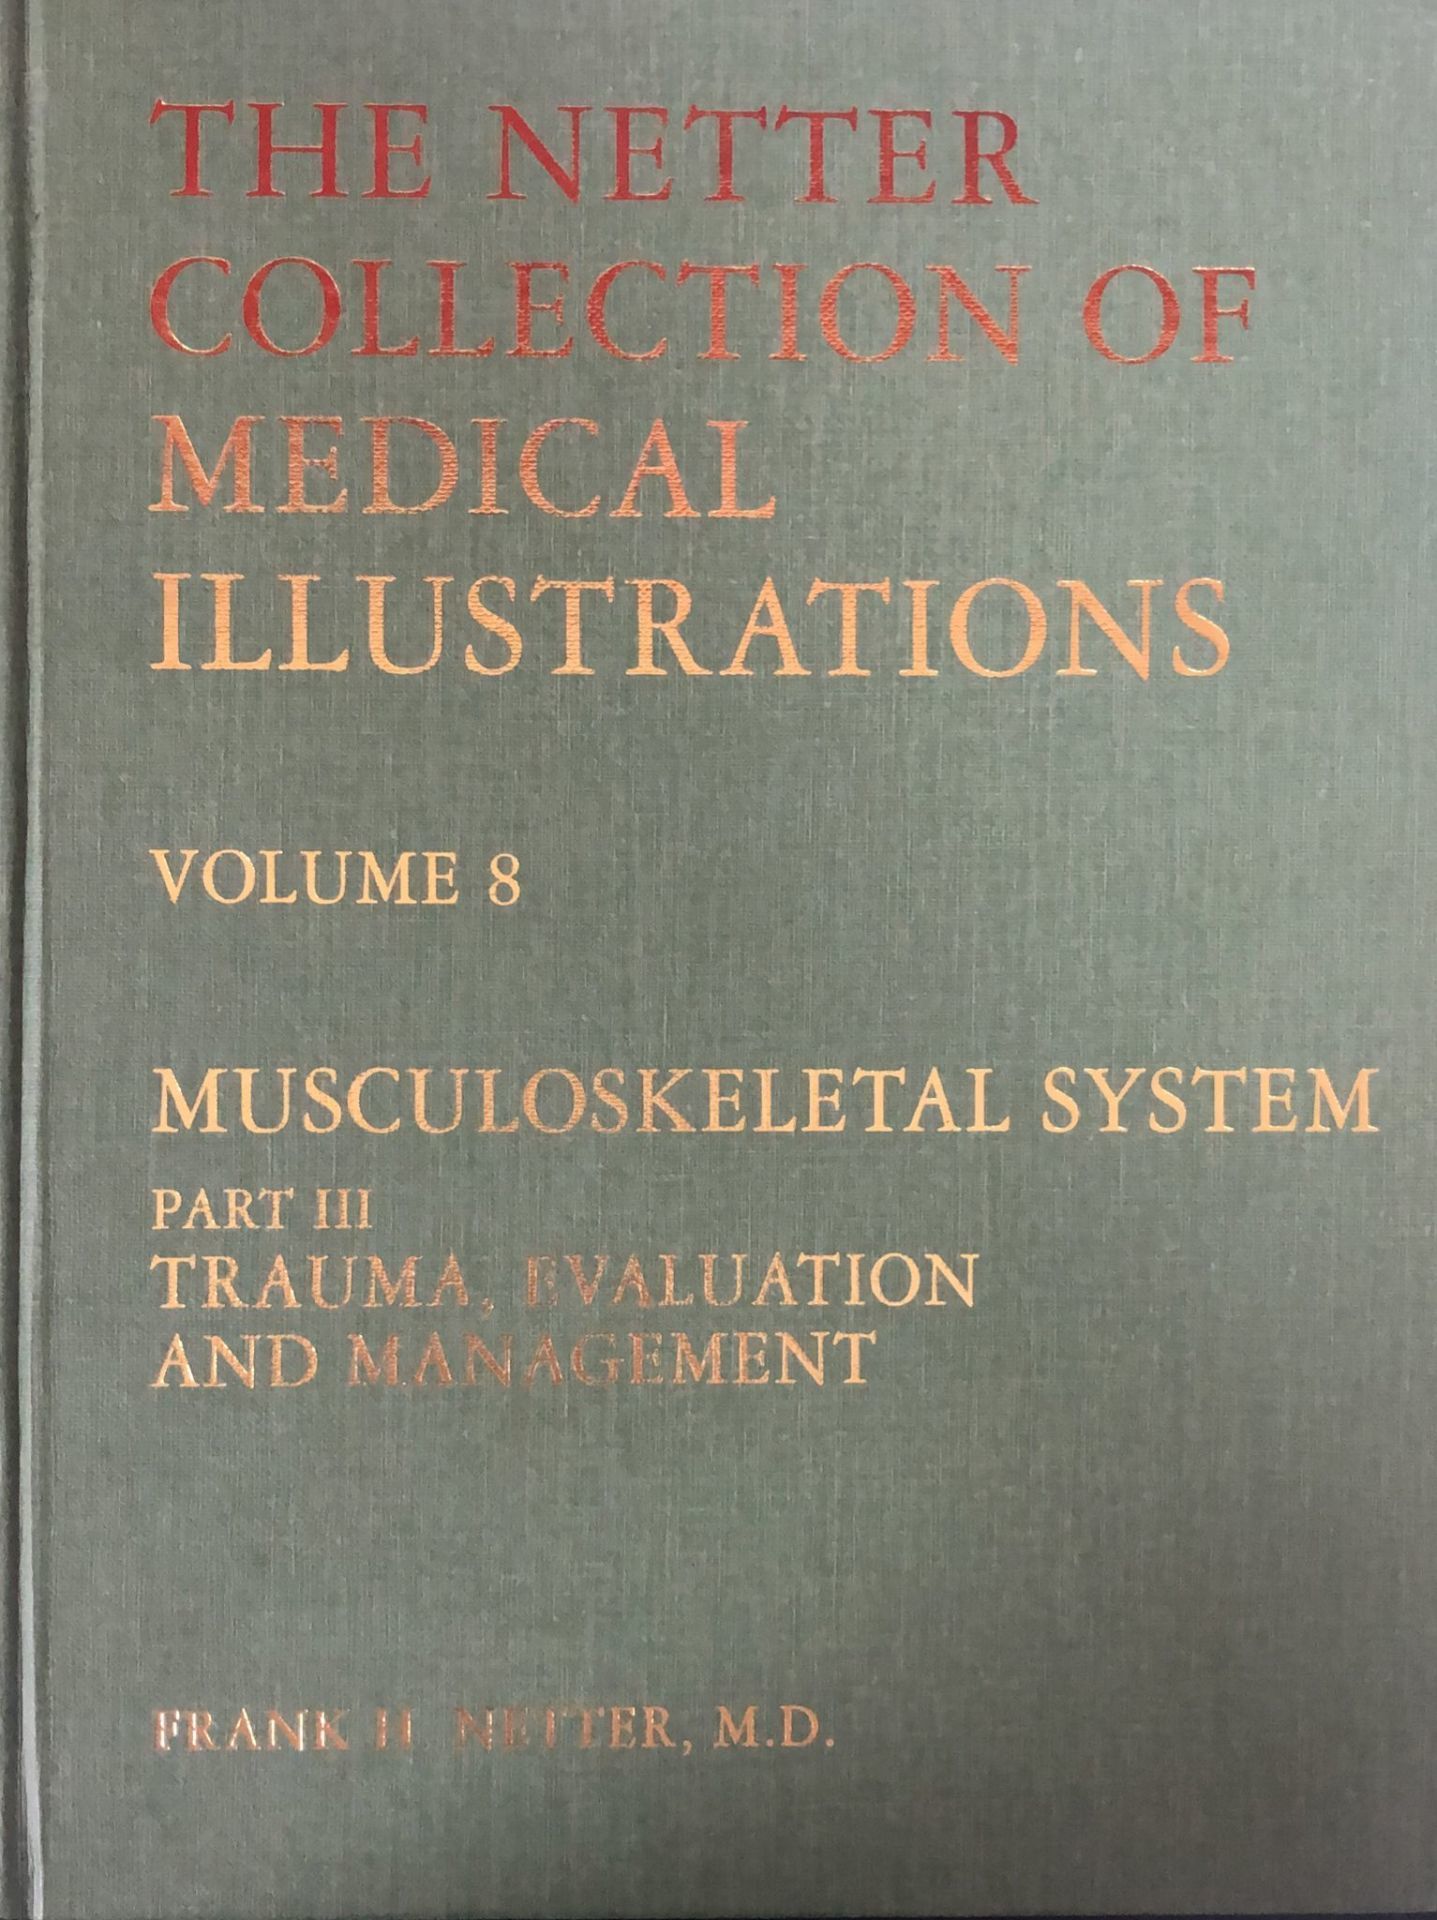 The Netter Collection of Medical Illustrations Volume 8 Musculoskeletal System Part 3 Trauma, Evaluation and Management